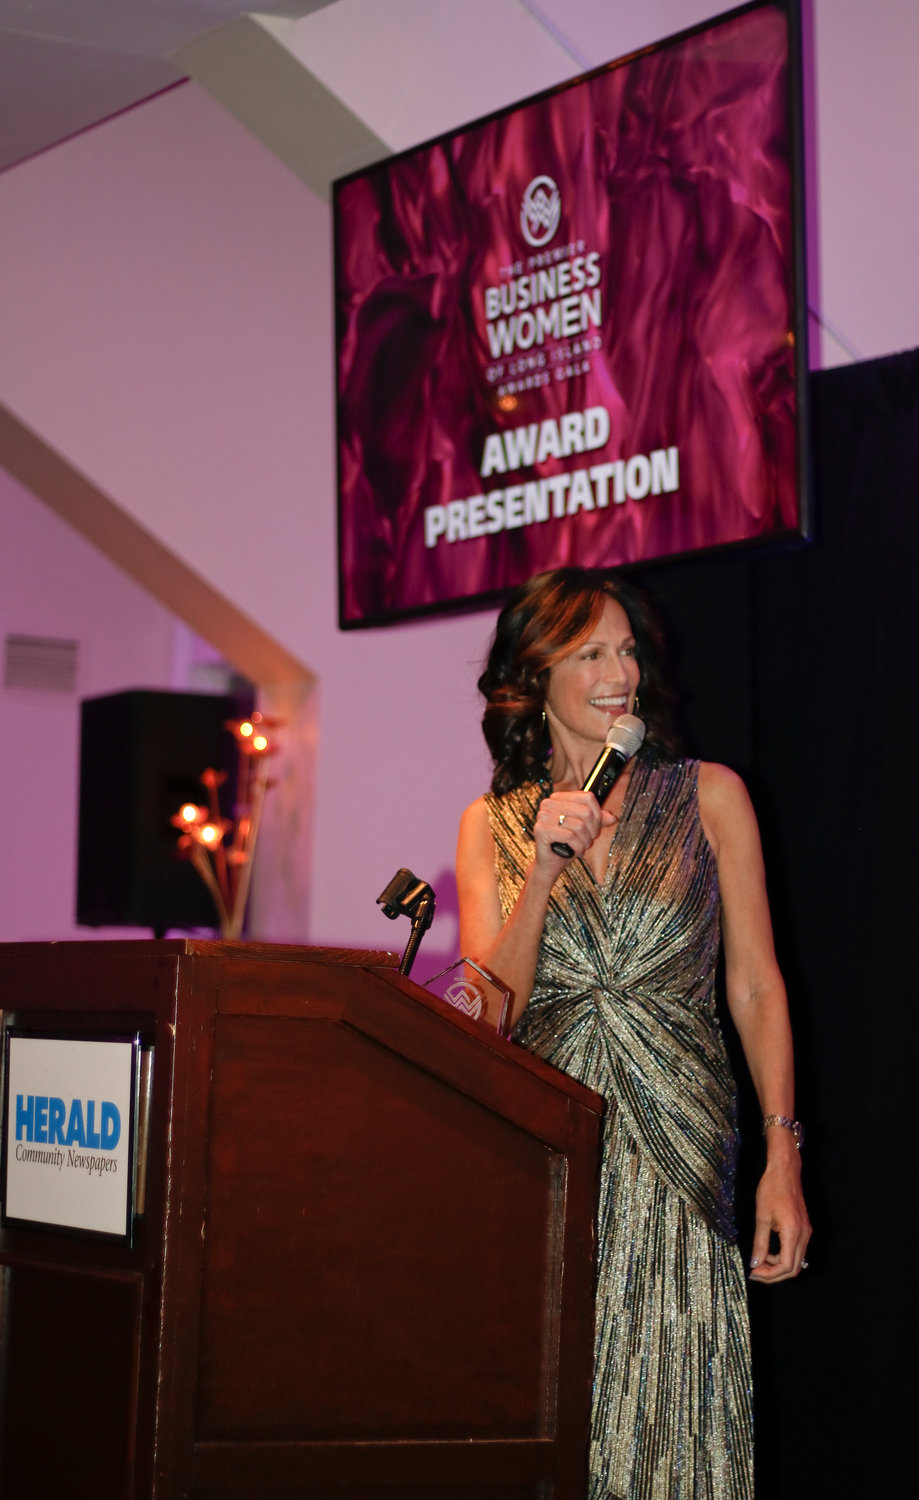 Television host, author and businesswoman Judy Goss hosted RichnerLive’s Premier Business Women of Long Island event last March.